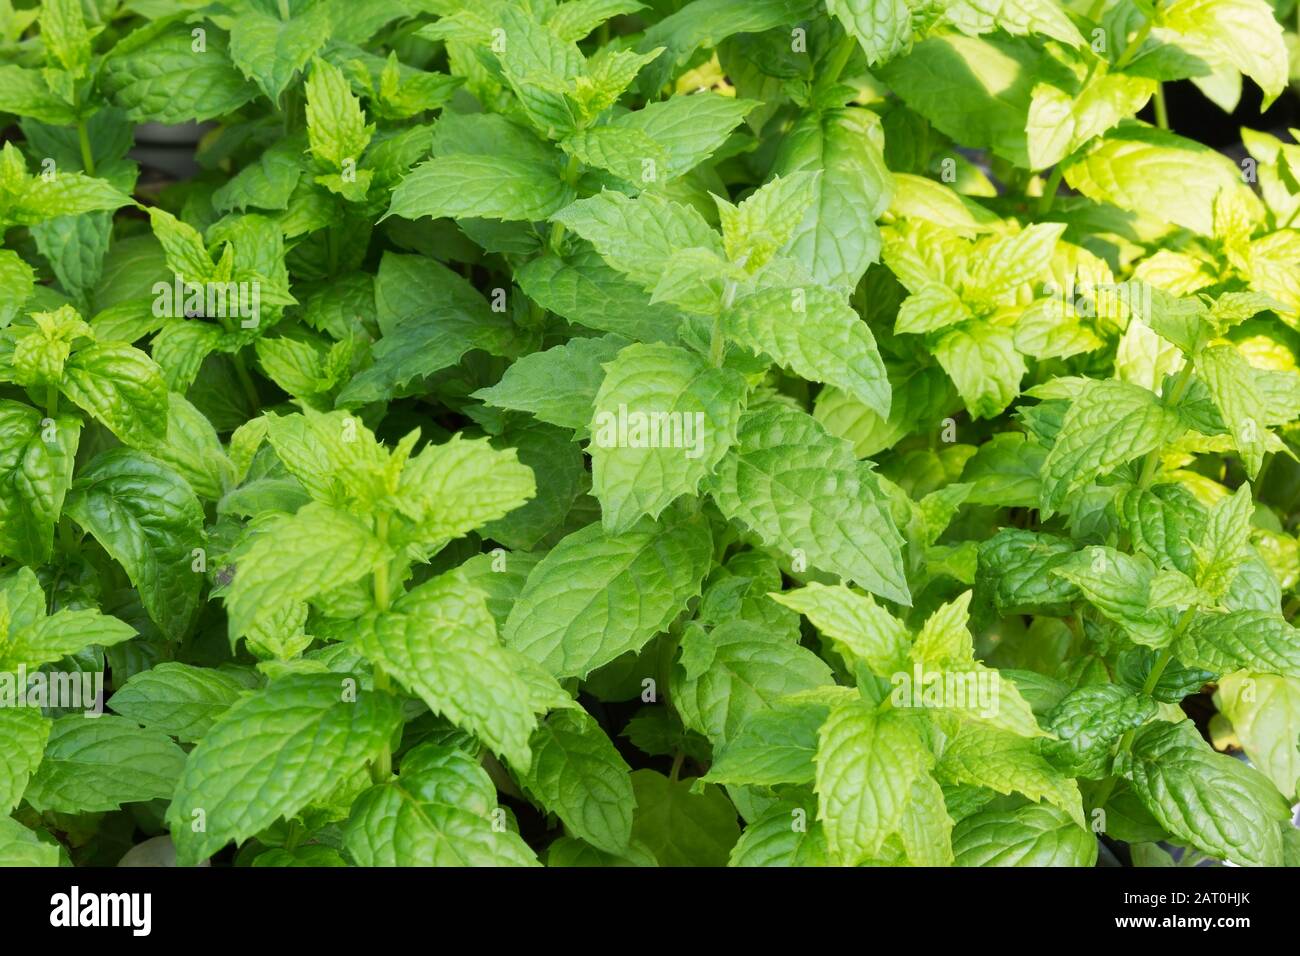 Mentha - Mint culinary herb plants being grown organically in containers inside a greenhouse Stock Photo